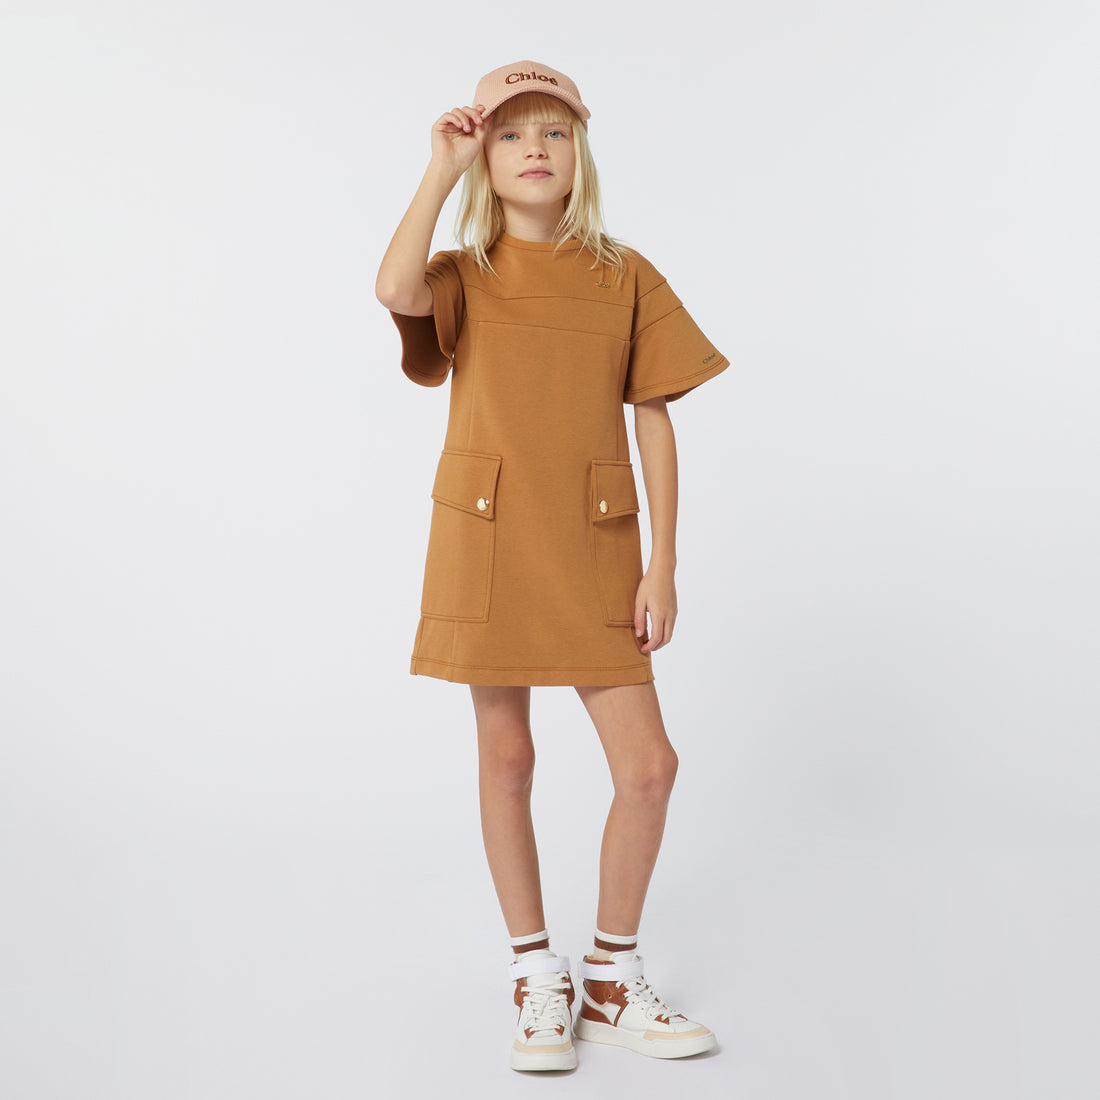 Chloe Dress - Elegant and Comfortable for Any Occasion | Schools Out